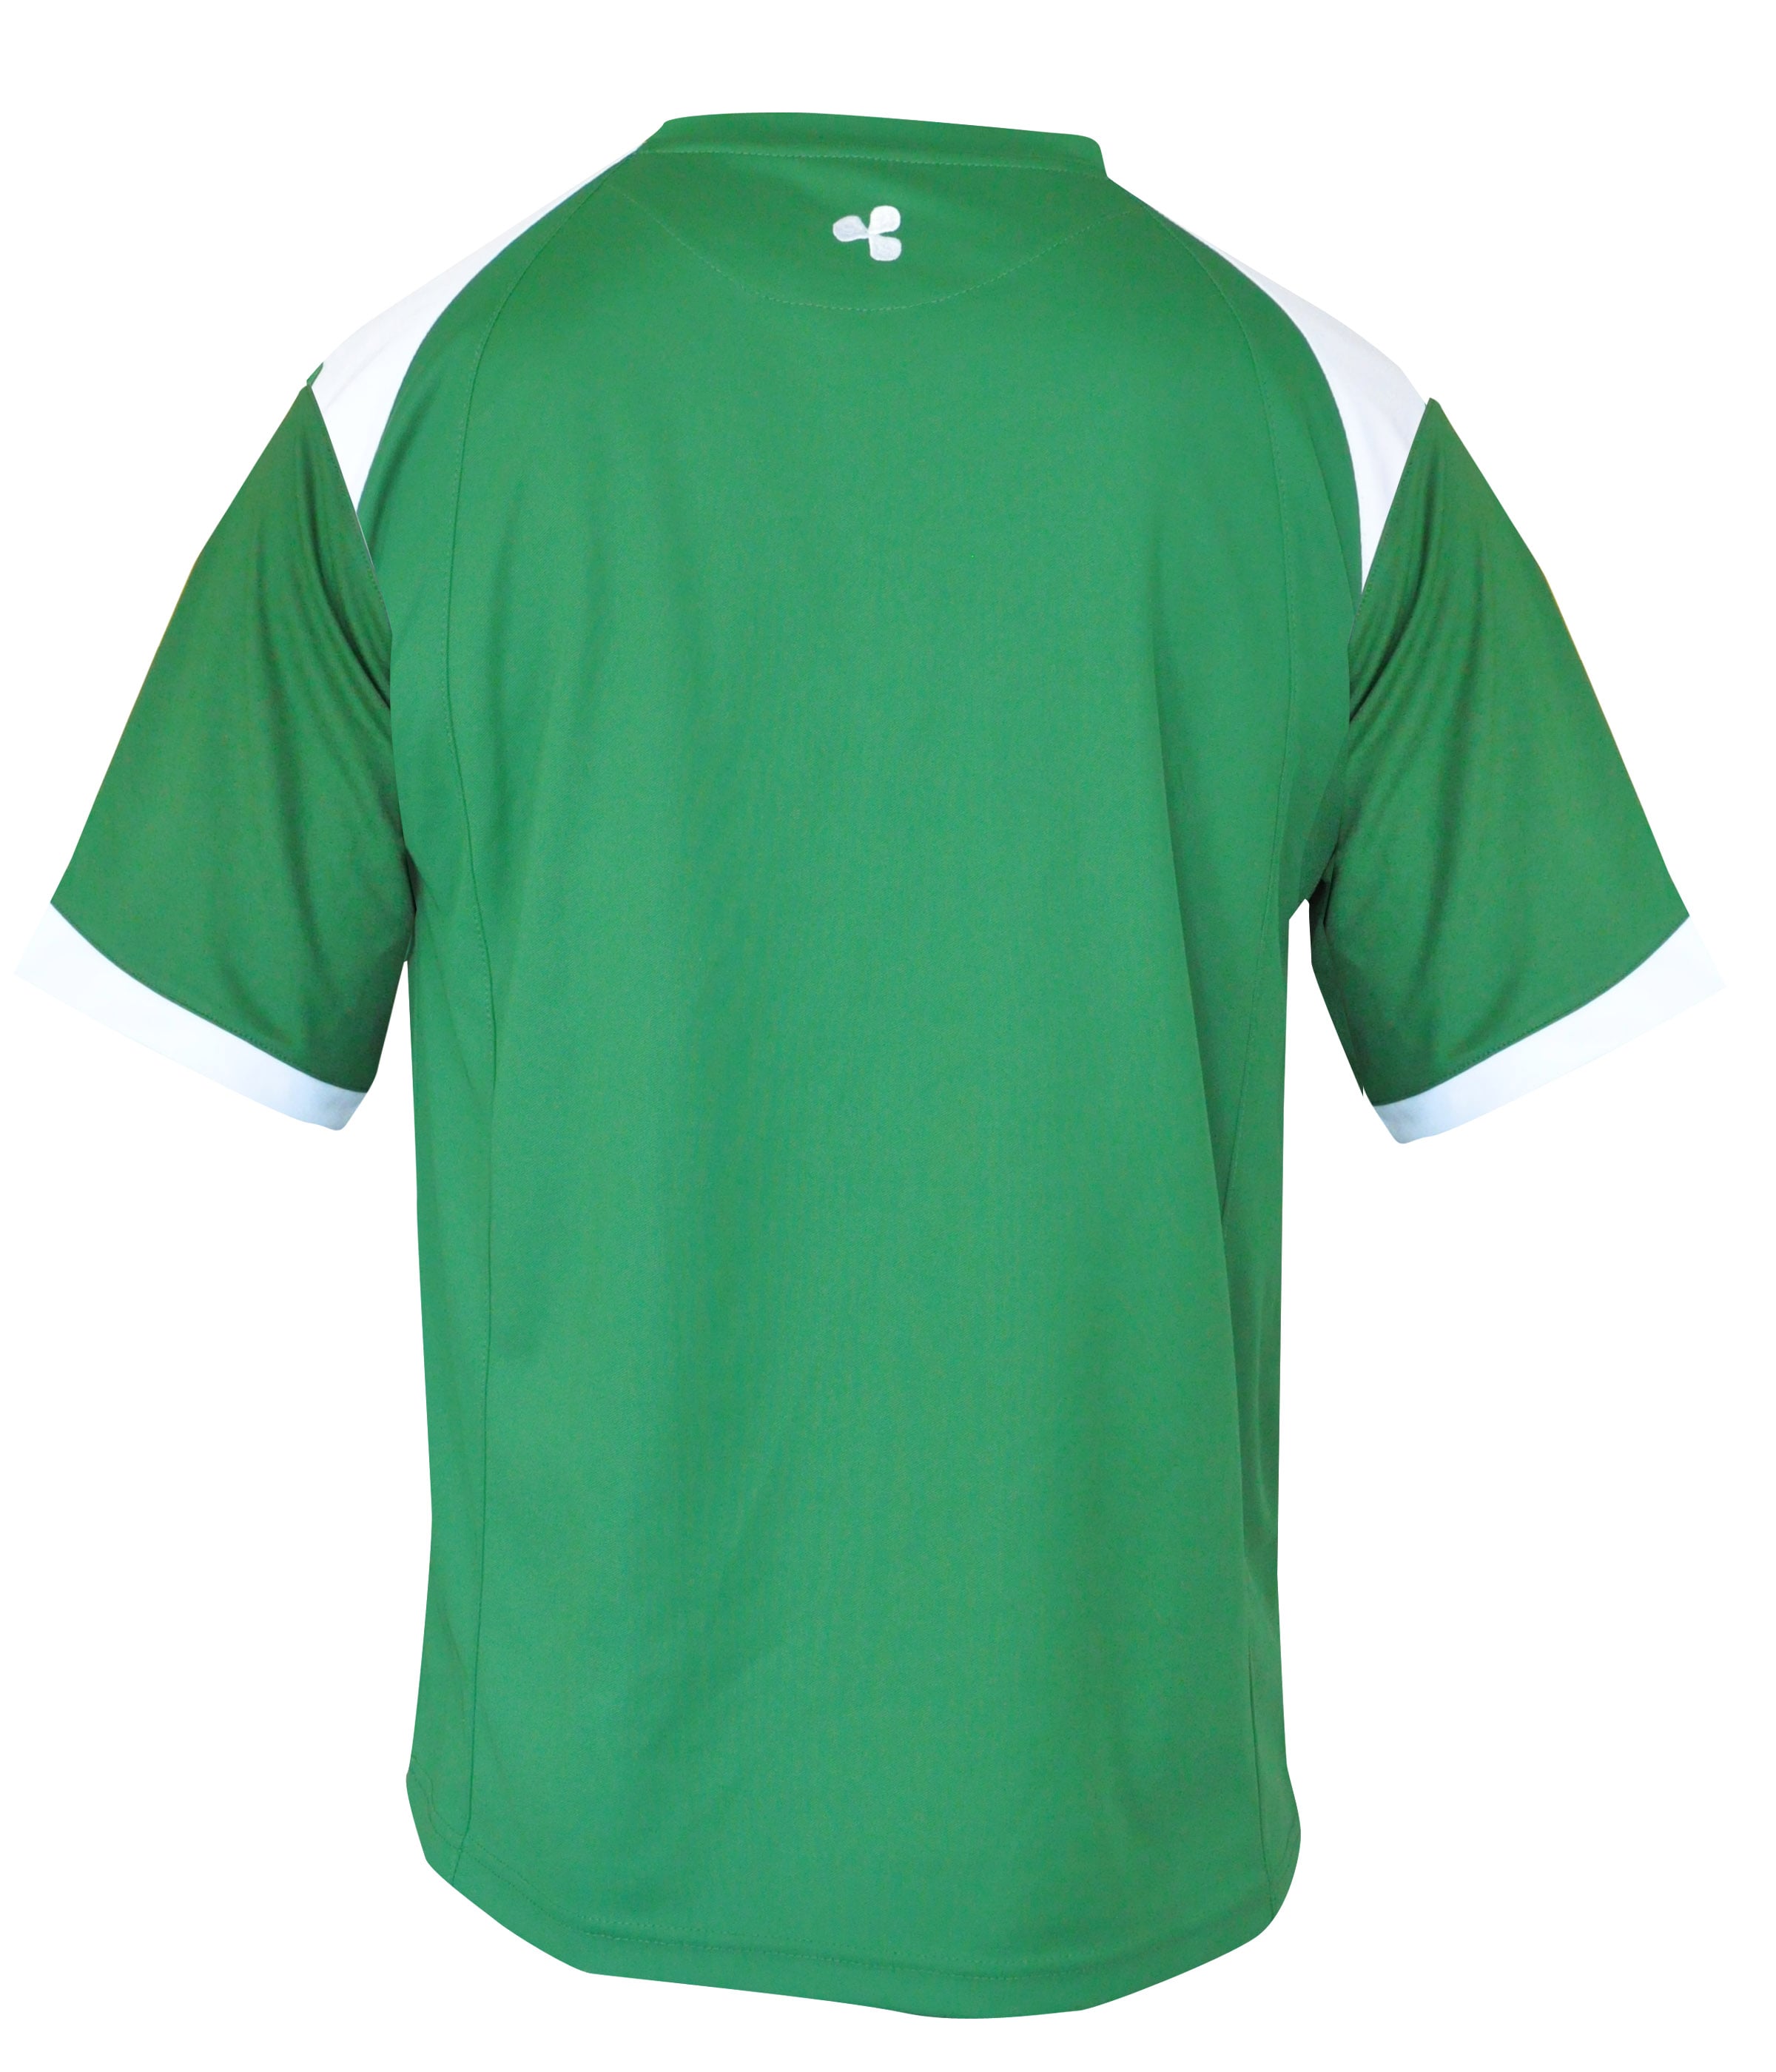 Green and White Performance Top